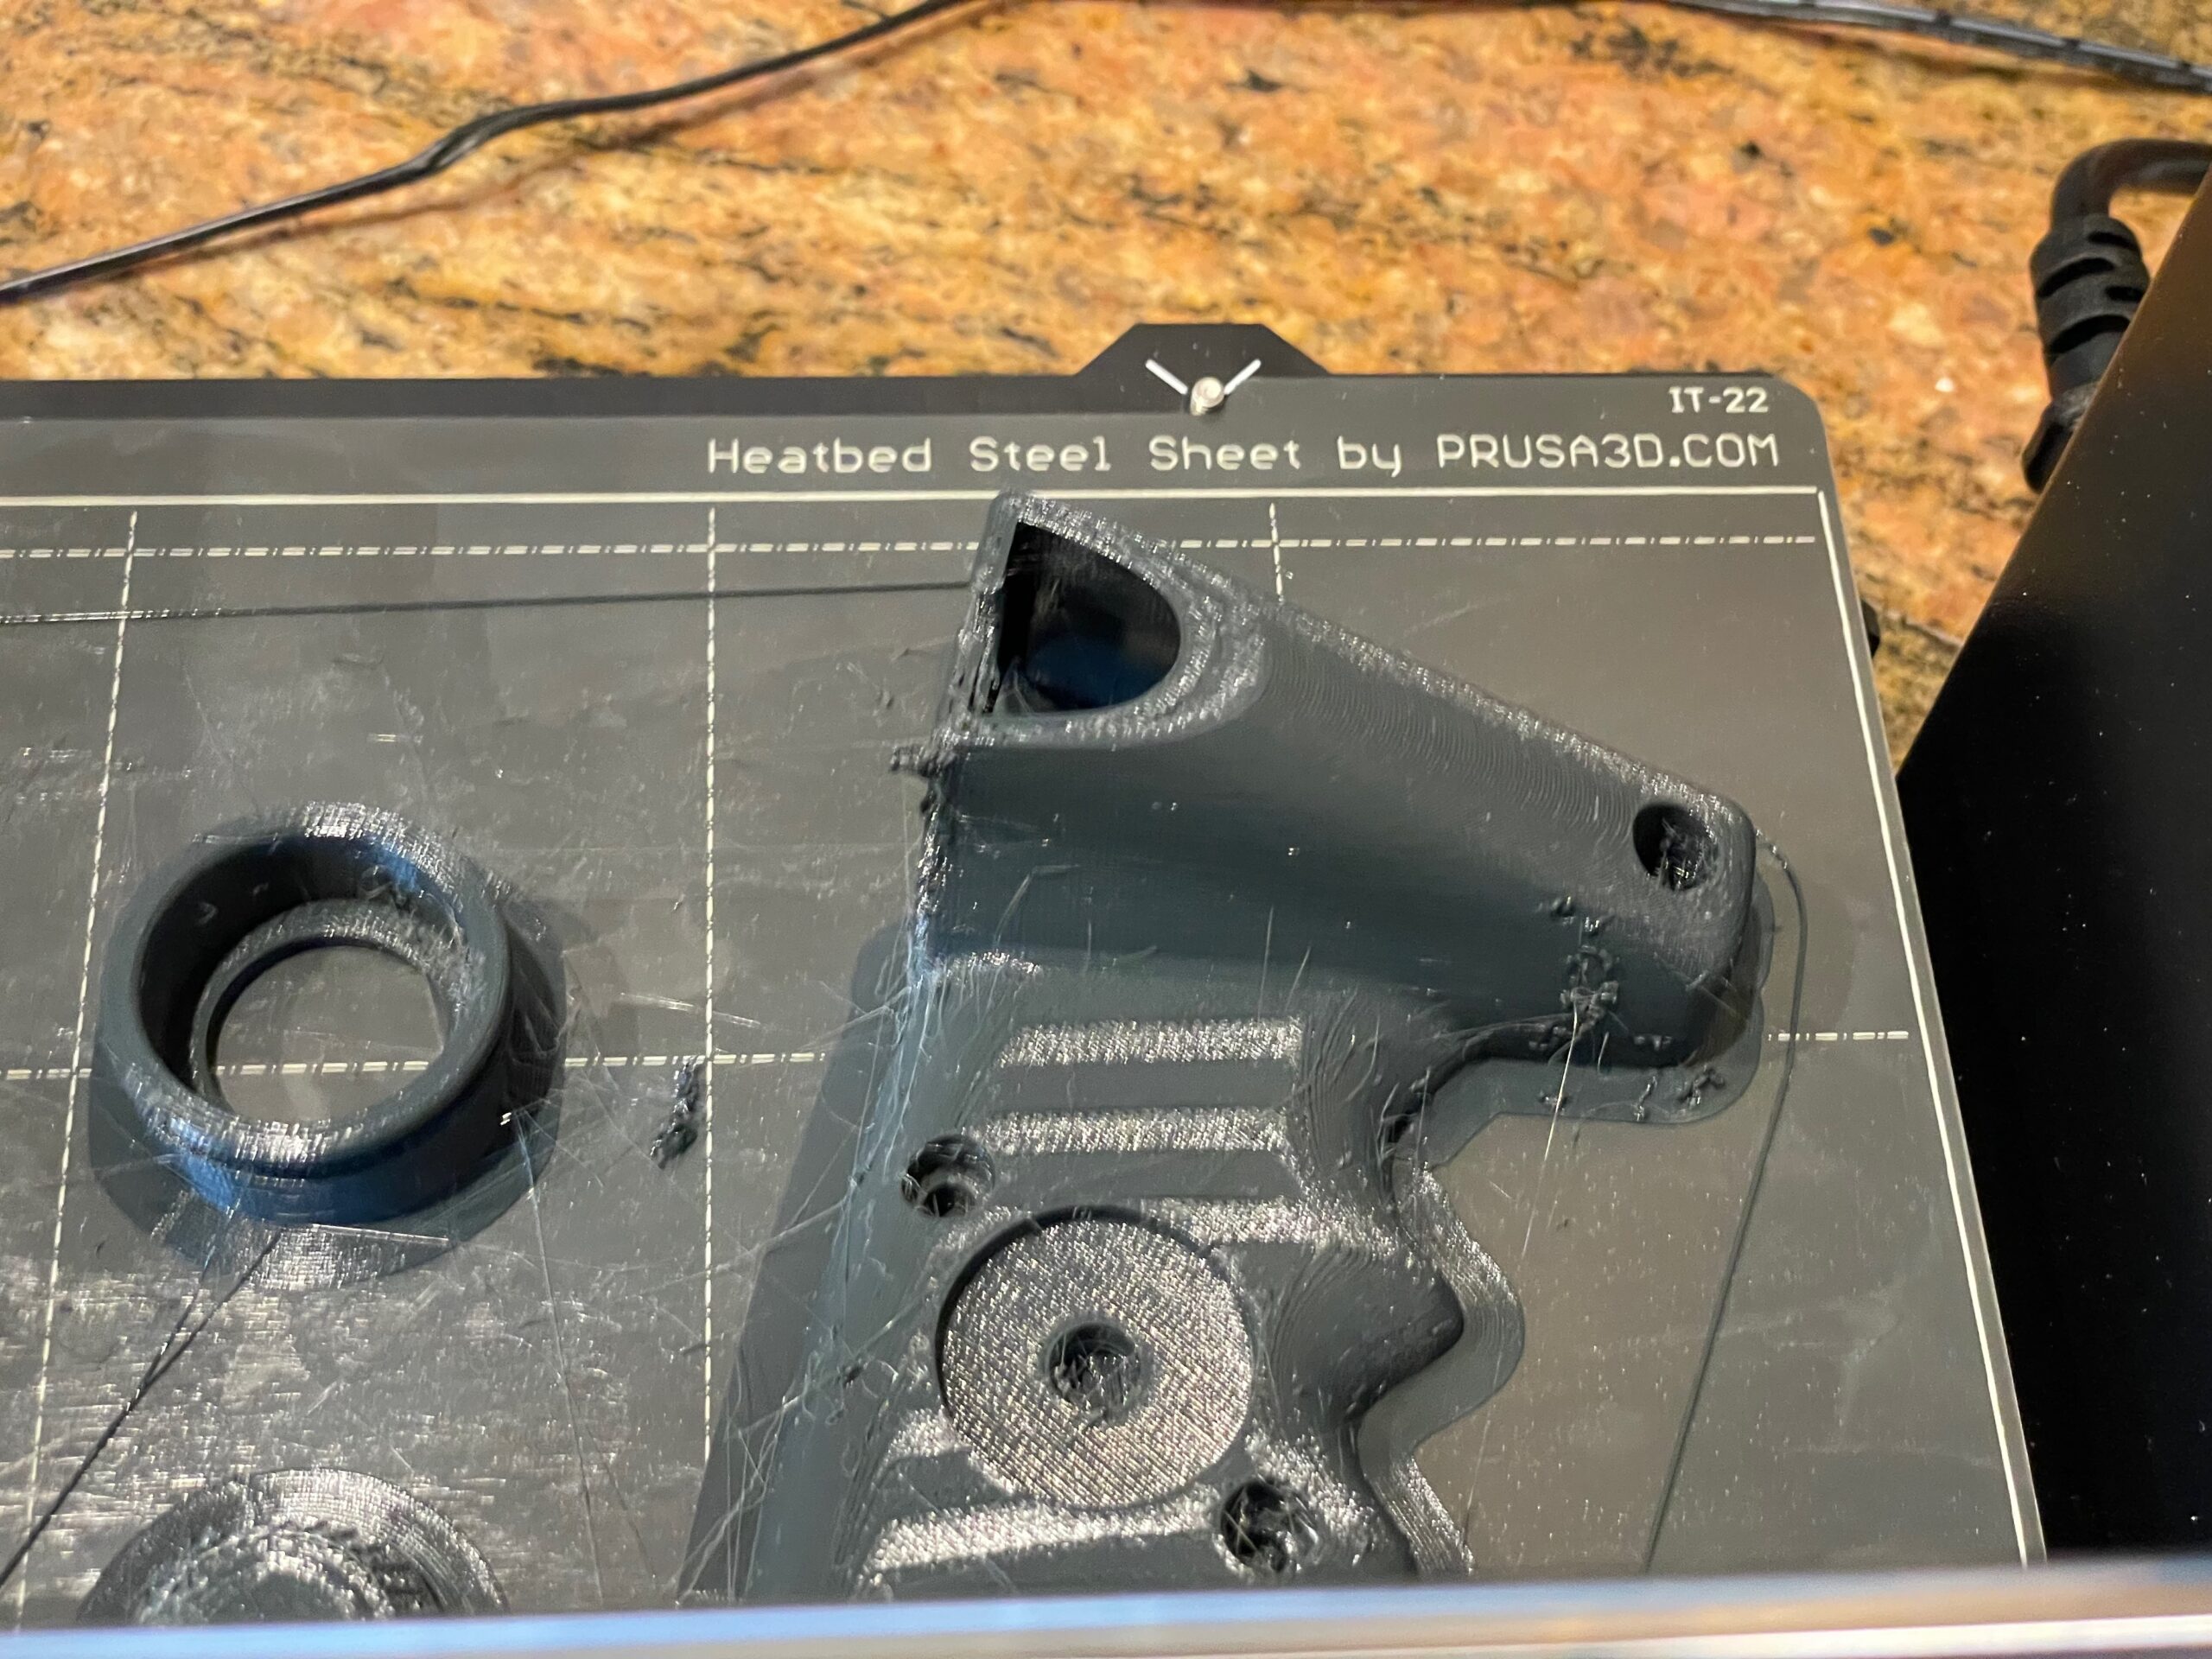 Printing with PETG – How do I print this? (Printing help